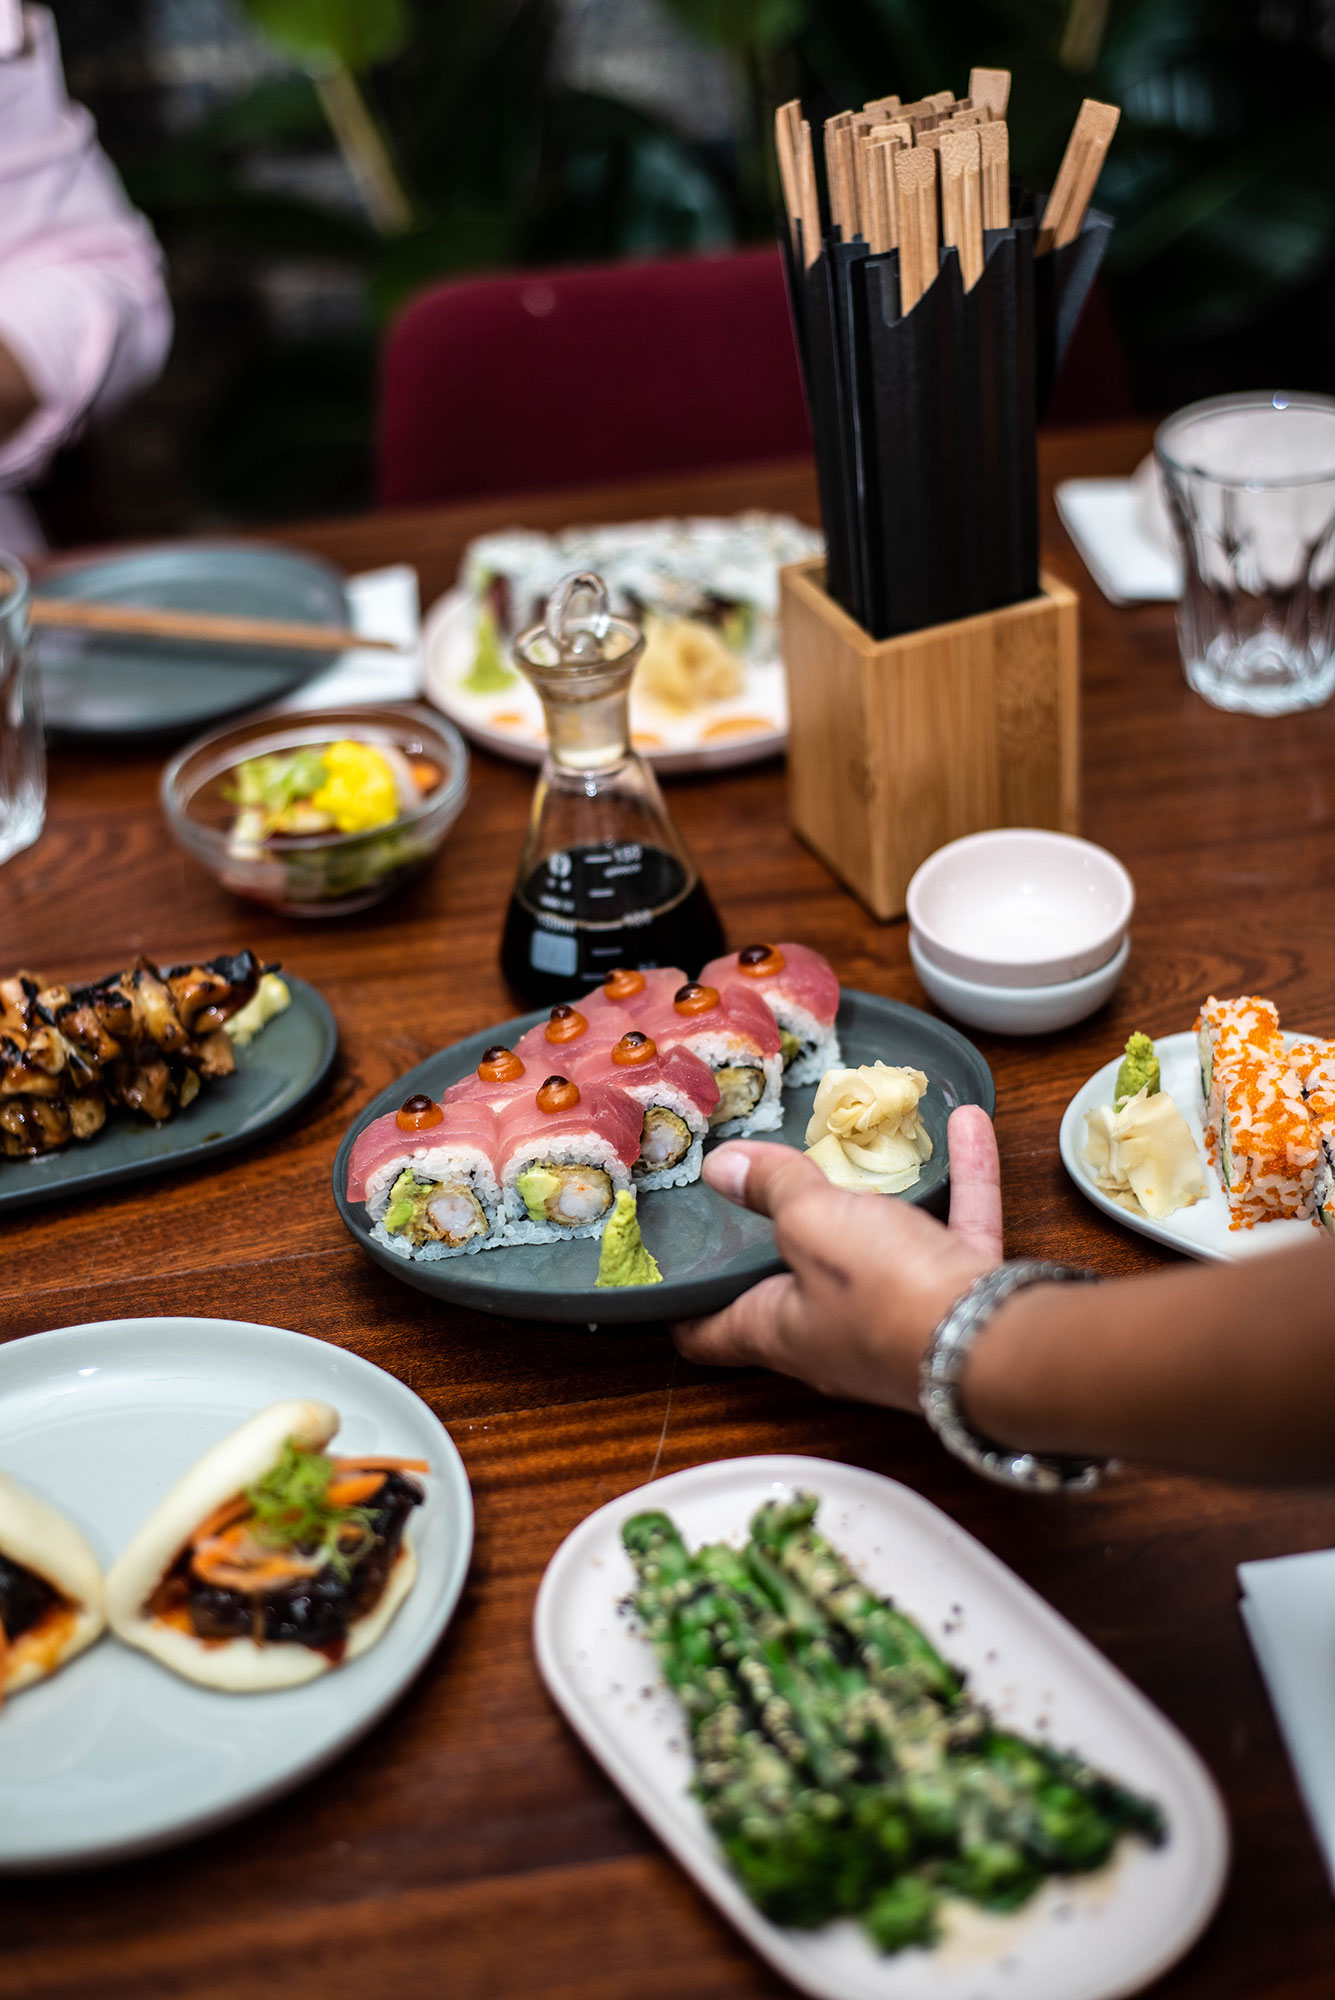 Apothecary serves a range of delicious sushi and Japanese-influenced dishes